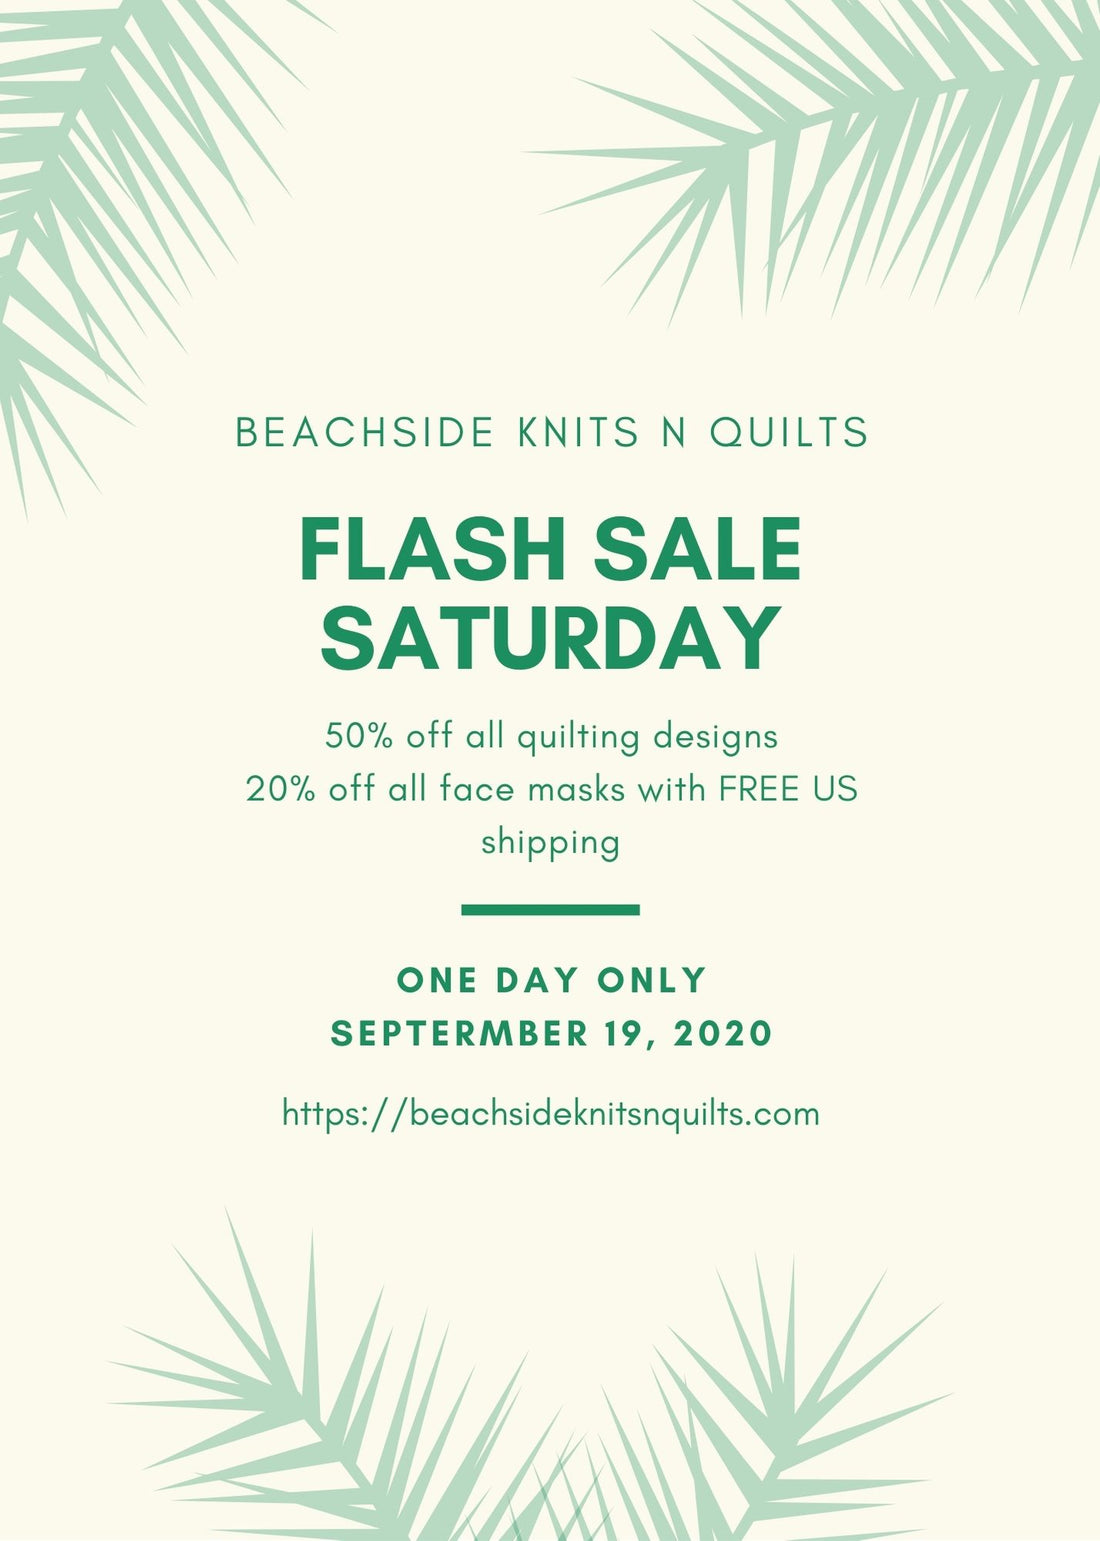 Our First Flash Sale Saturday